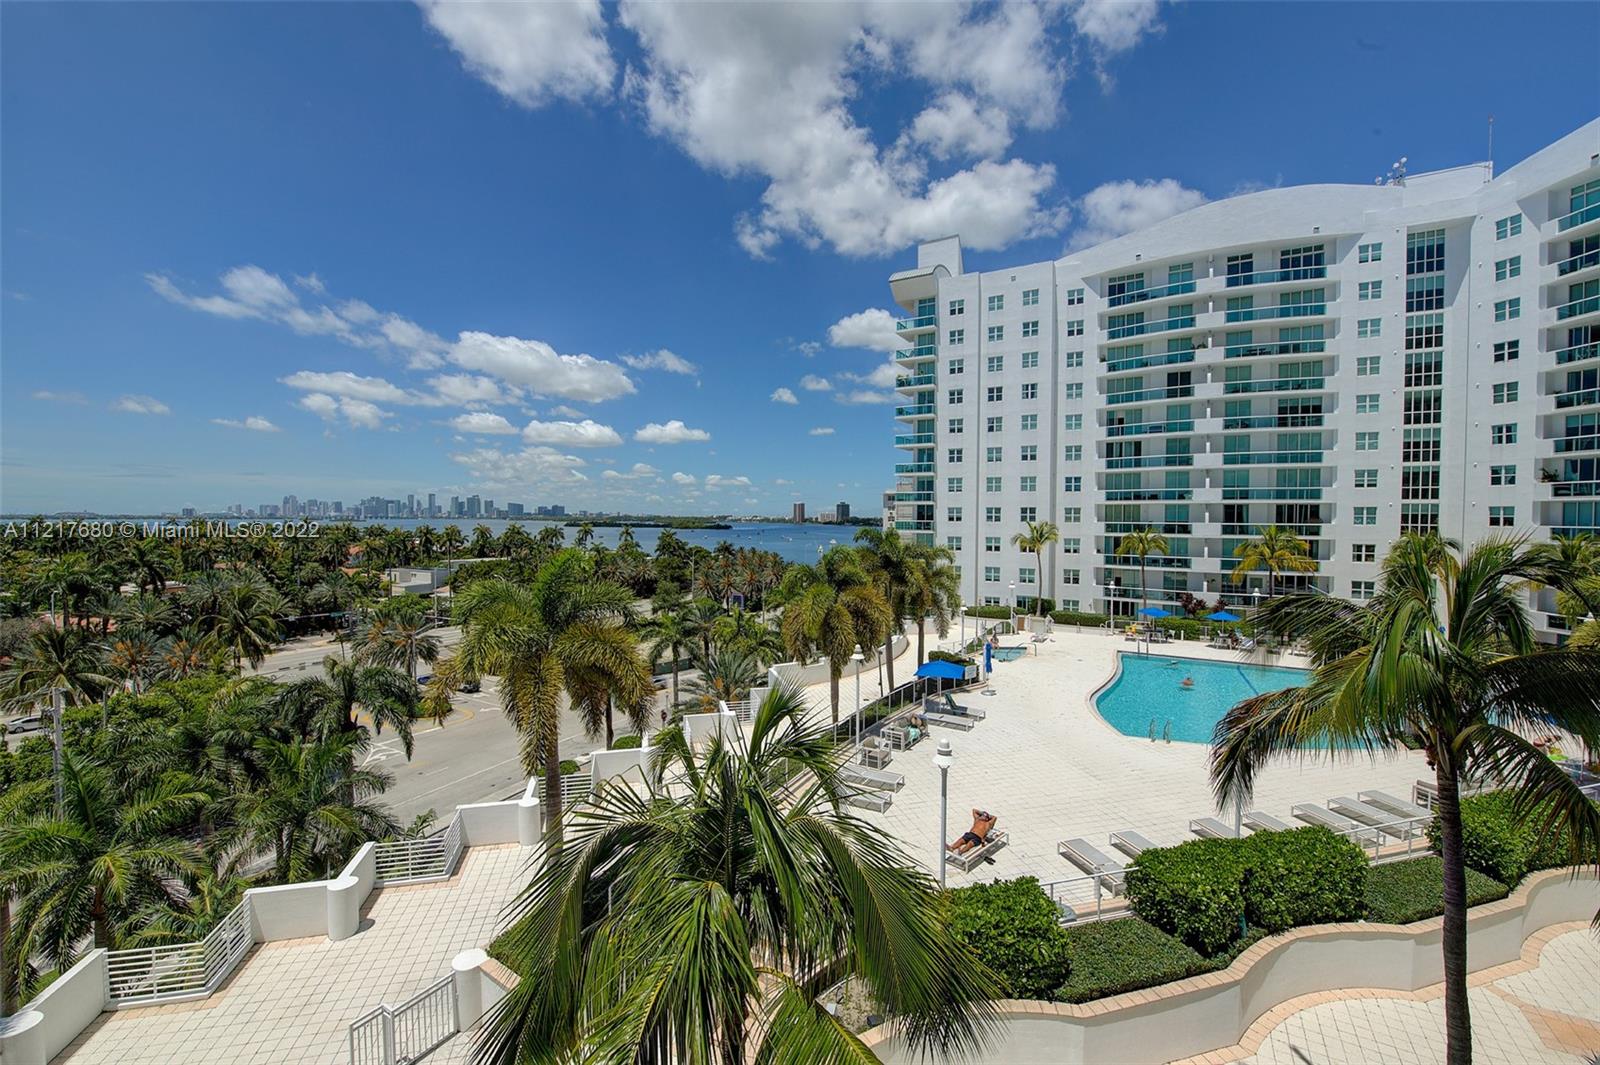 7900  Harbor Island Dr #811 For Sale A11217680, FL